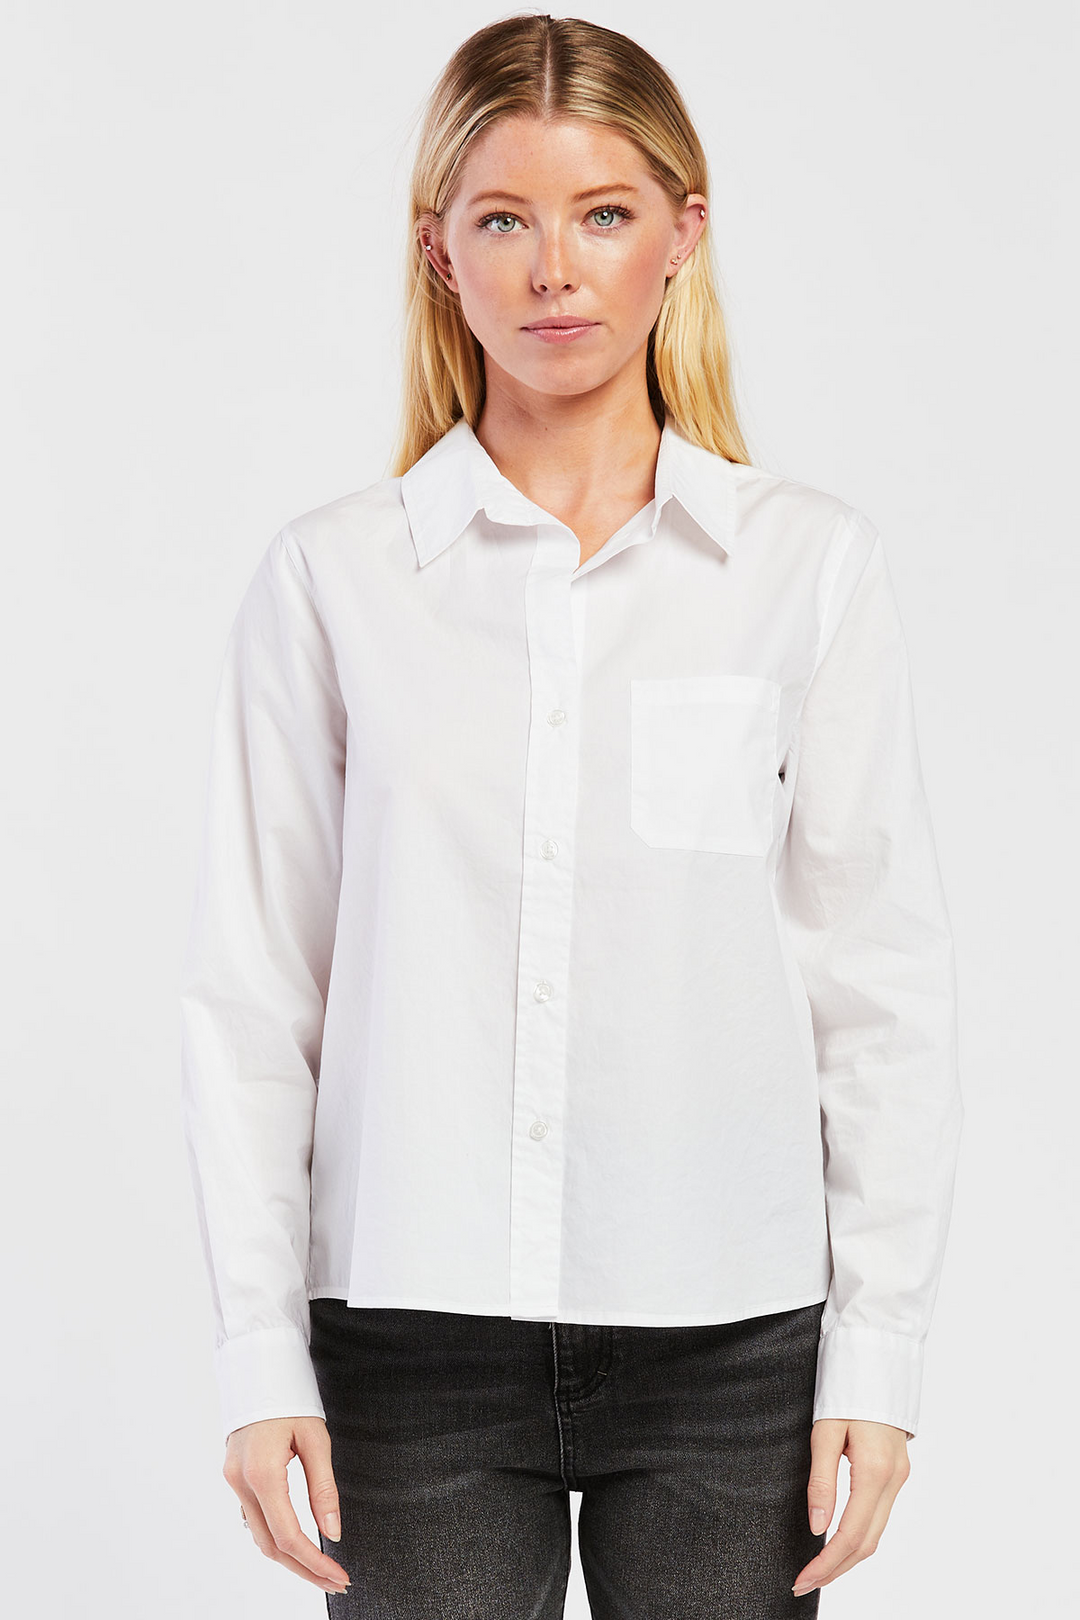 CHELINA TOP - WHITE - Kingfisher Road - Online Boutique